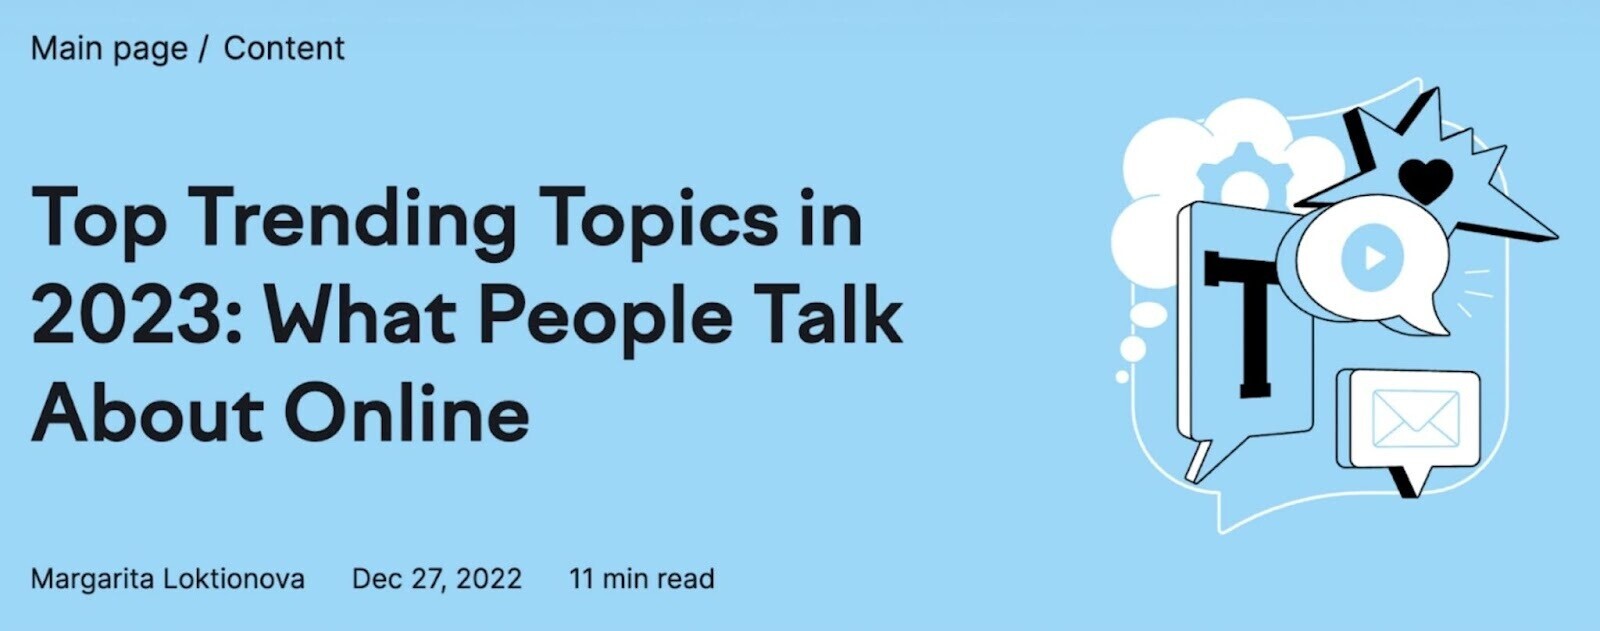 "Top Trending Topics in 2023: What People Talk About Online" title